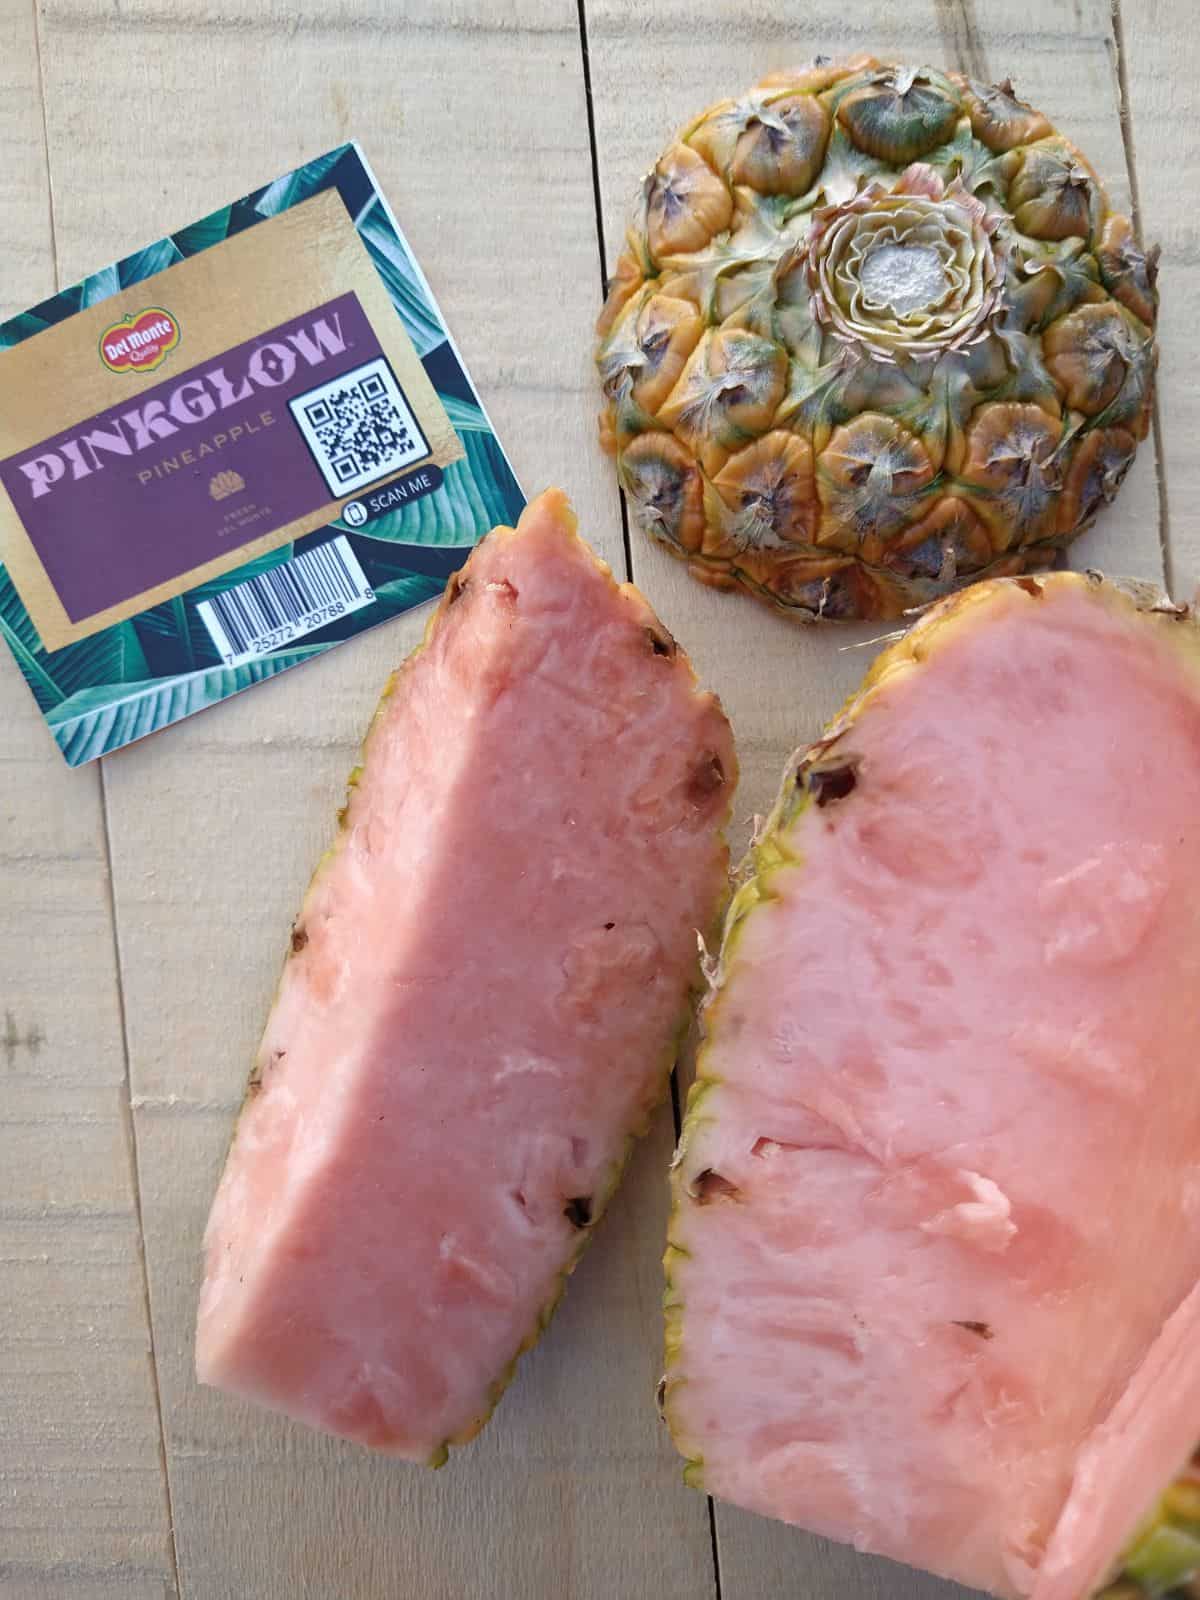 A wedge is cut out of a pink glow pineapple. The wedge and rest of pineapple are on a wood board with the top part of the pineapple - crown missing at the top. A tag is to the upper left corner.